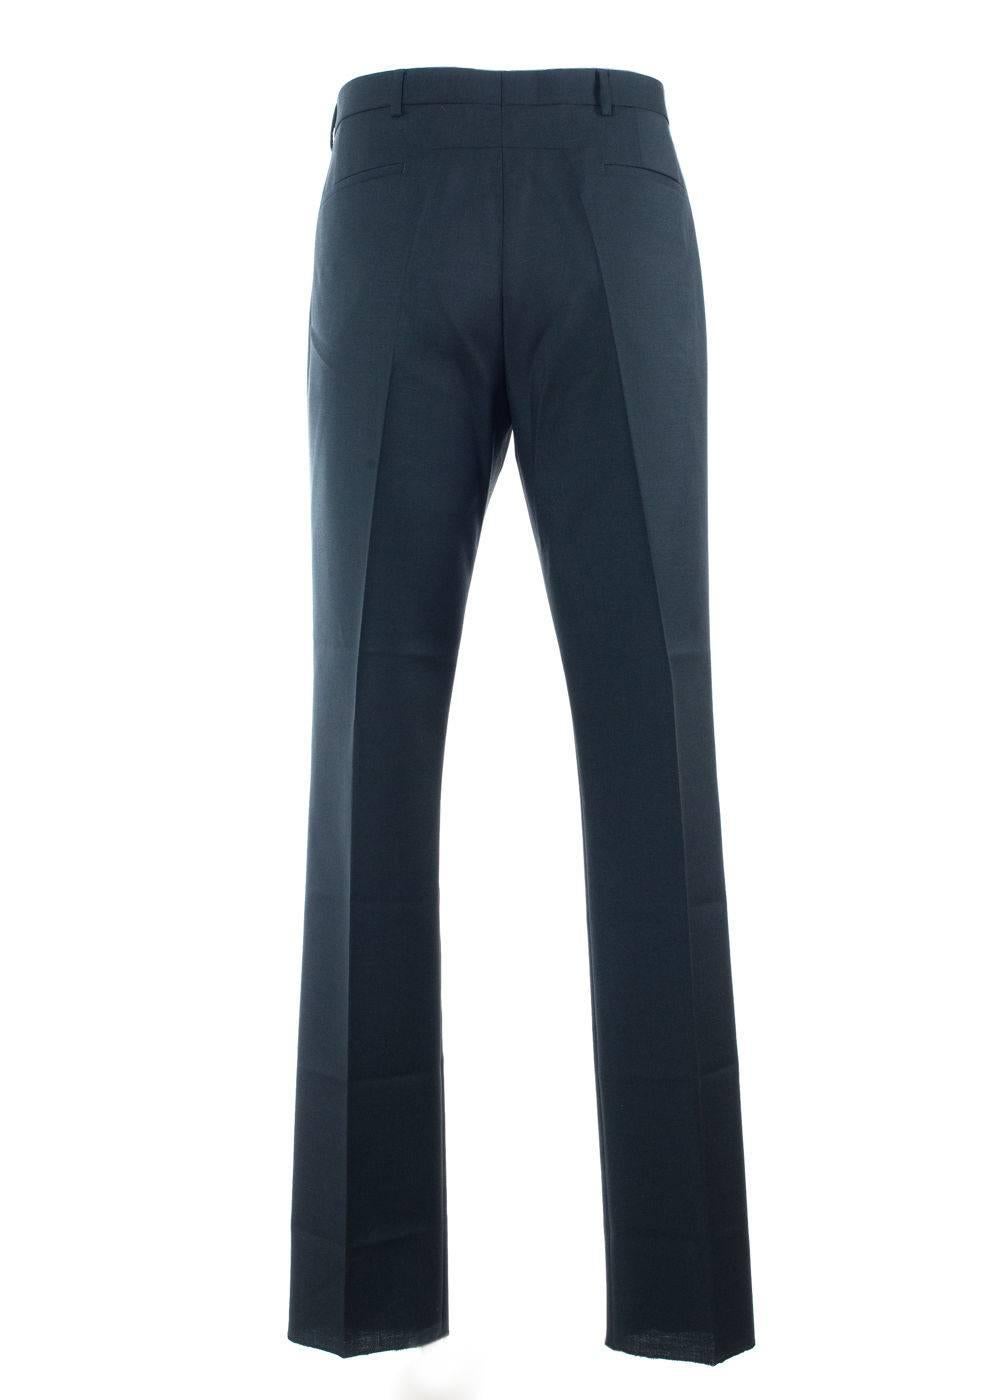 Givenchy Men's Classic Wool Blend Black Trousers  In New Condition For Sale In Brooklyn, NY